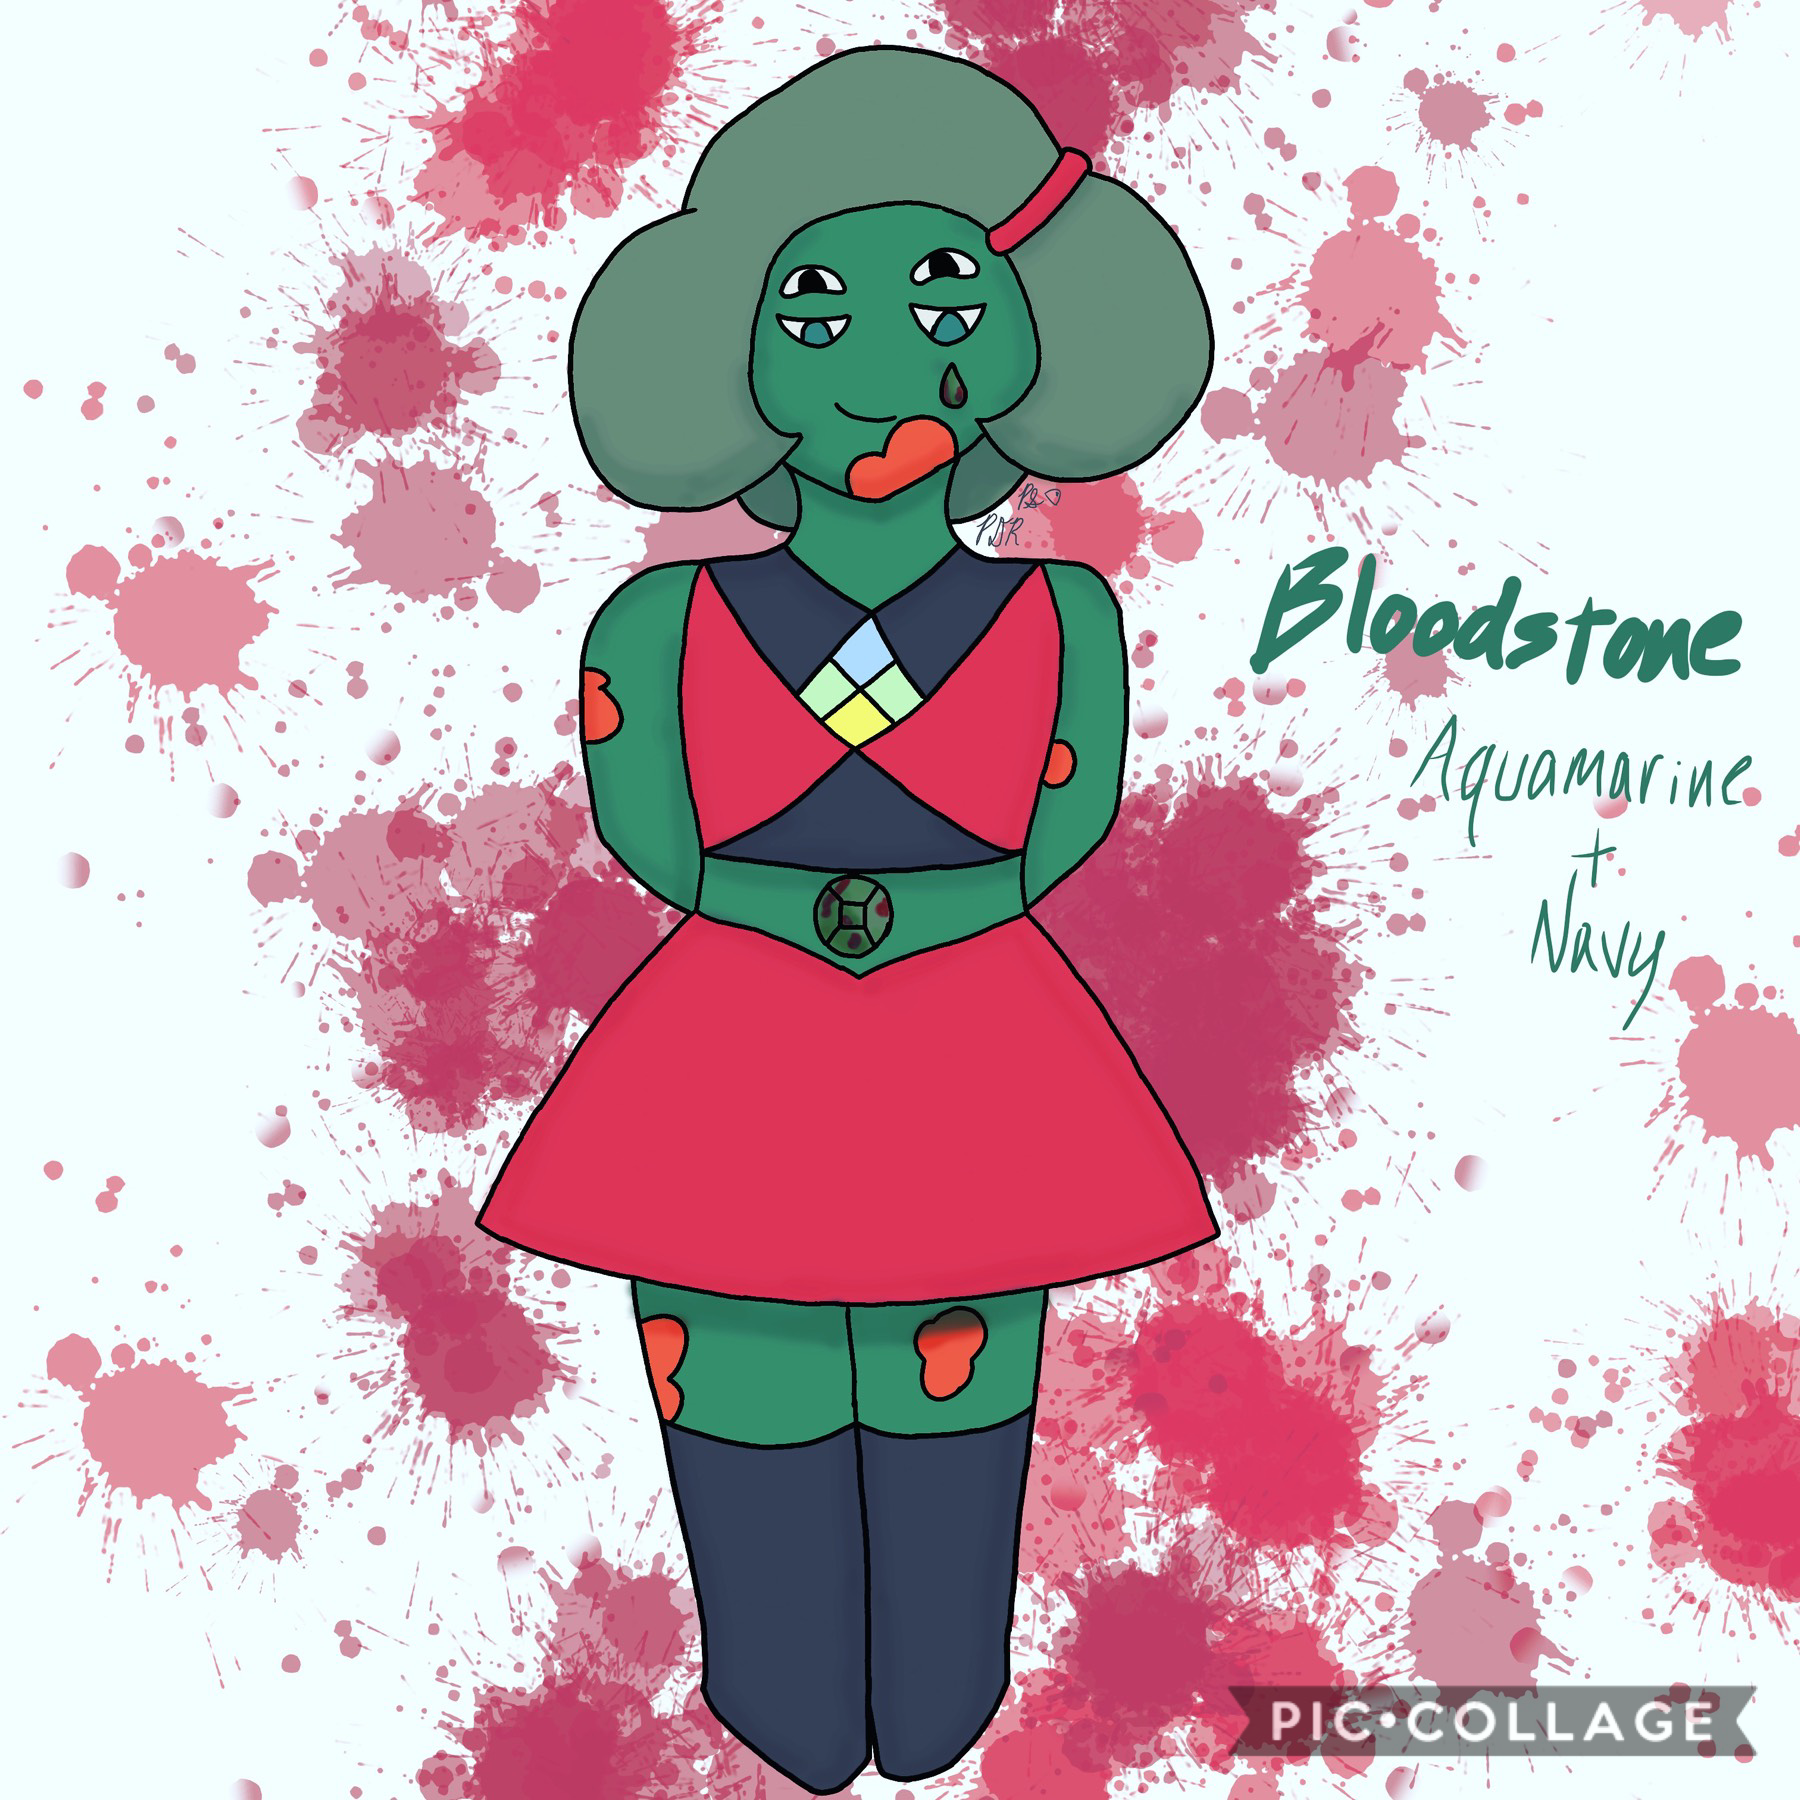 Bloodstone (Aquamarine + Navy) 

This fusion would be absolutely terrifying 

Side note I finally got the Instagram app so you can actually DM me now @pinkdiamondsrose